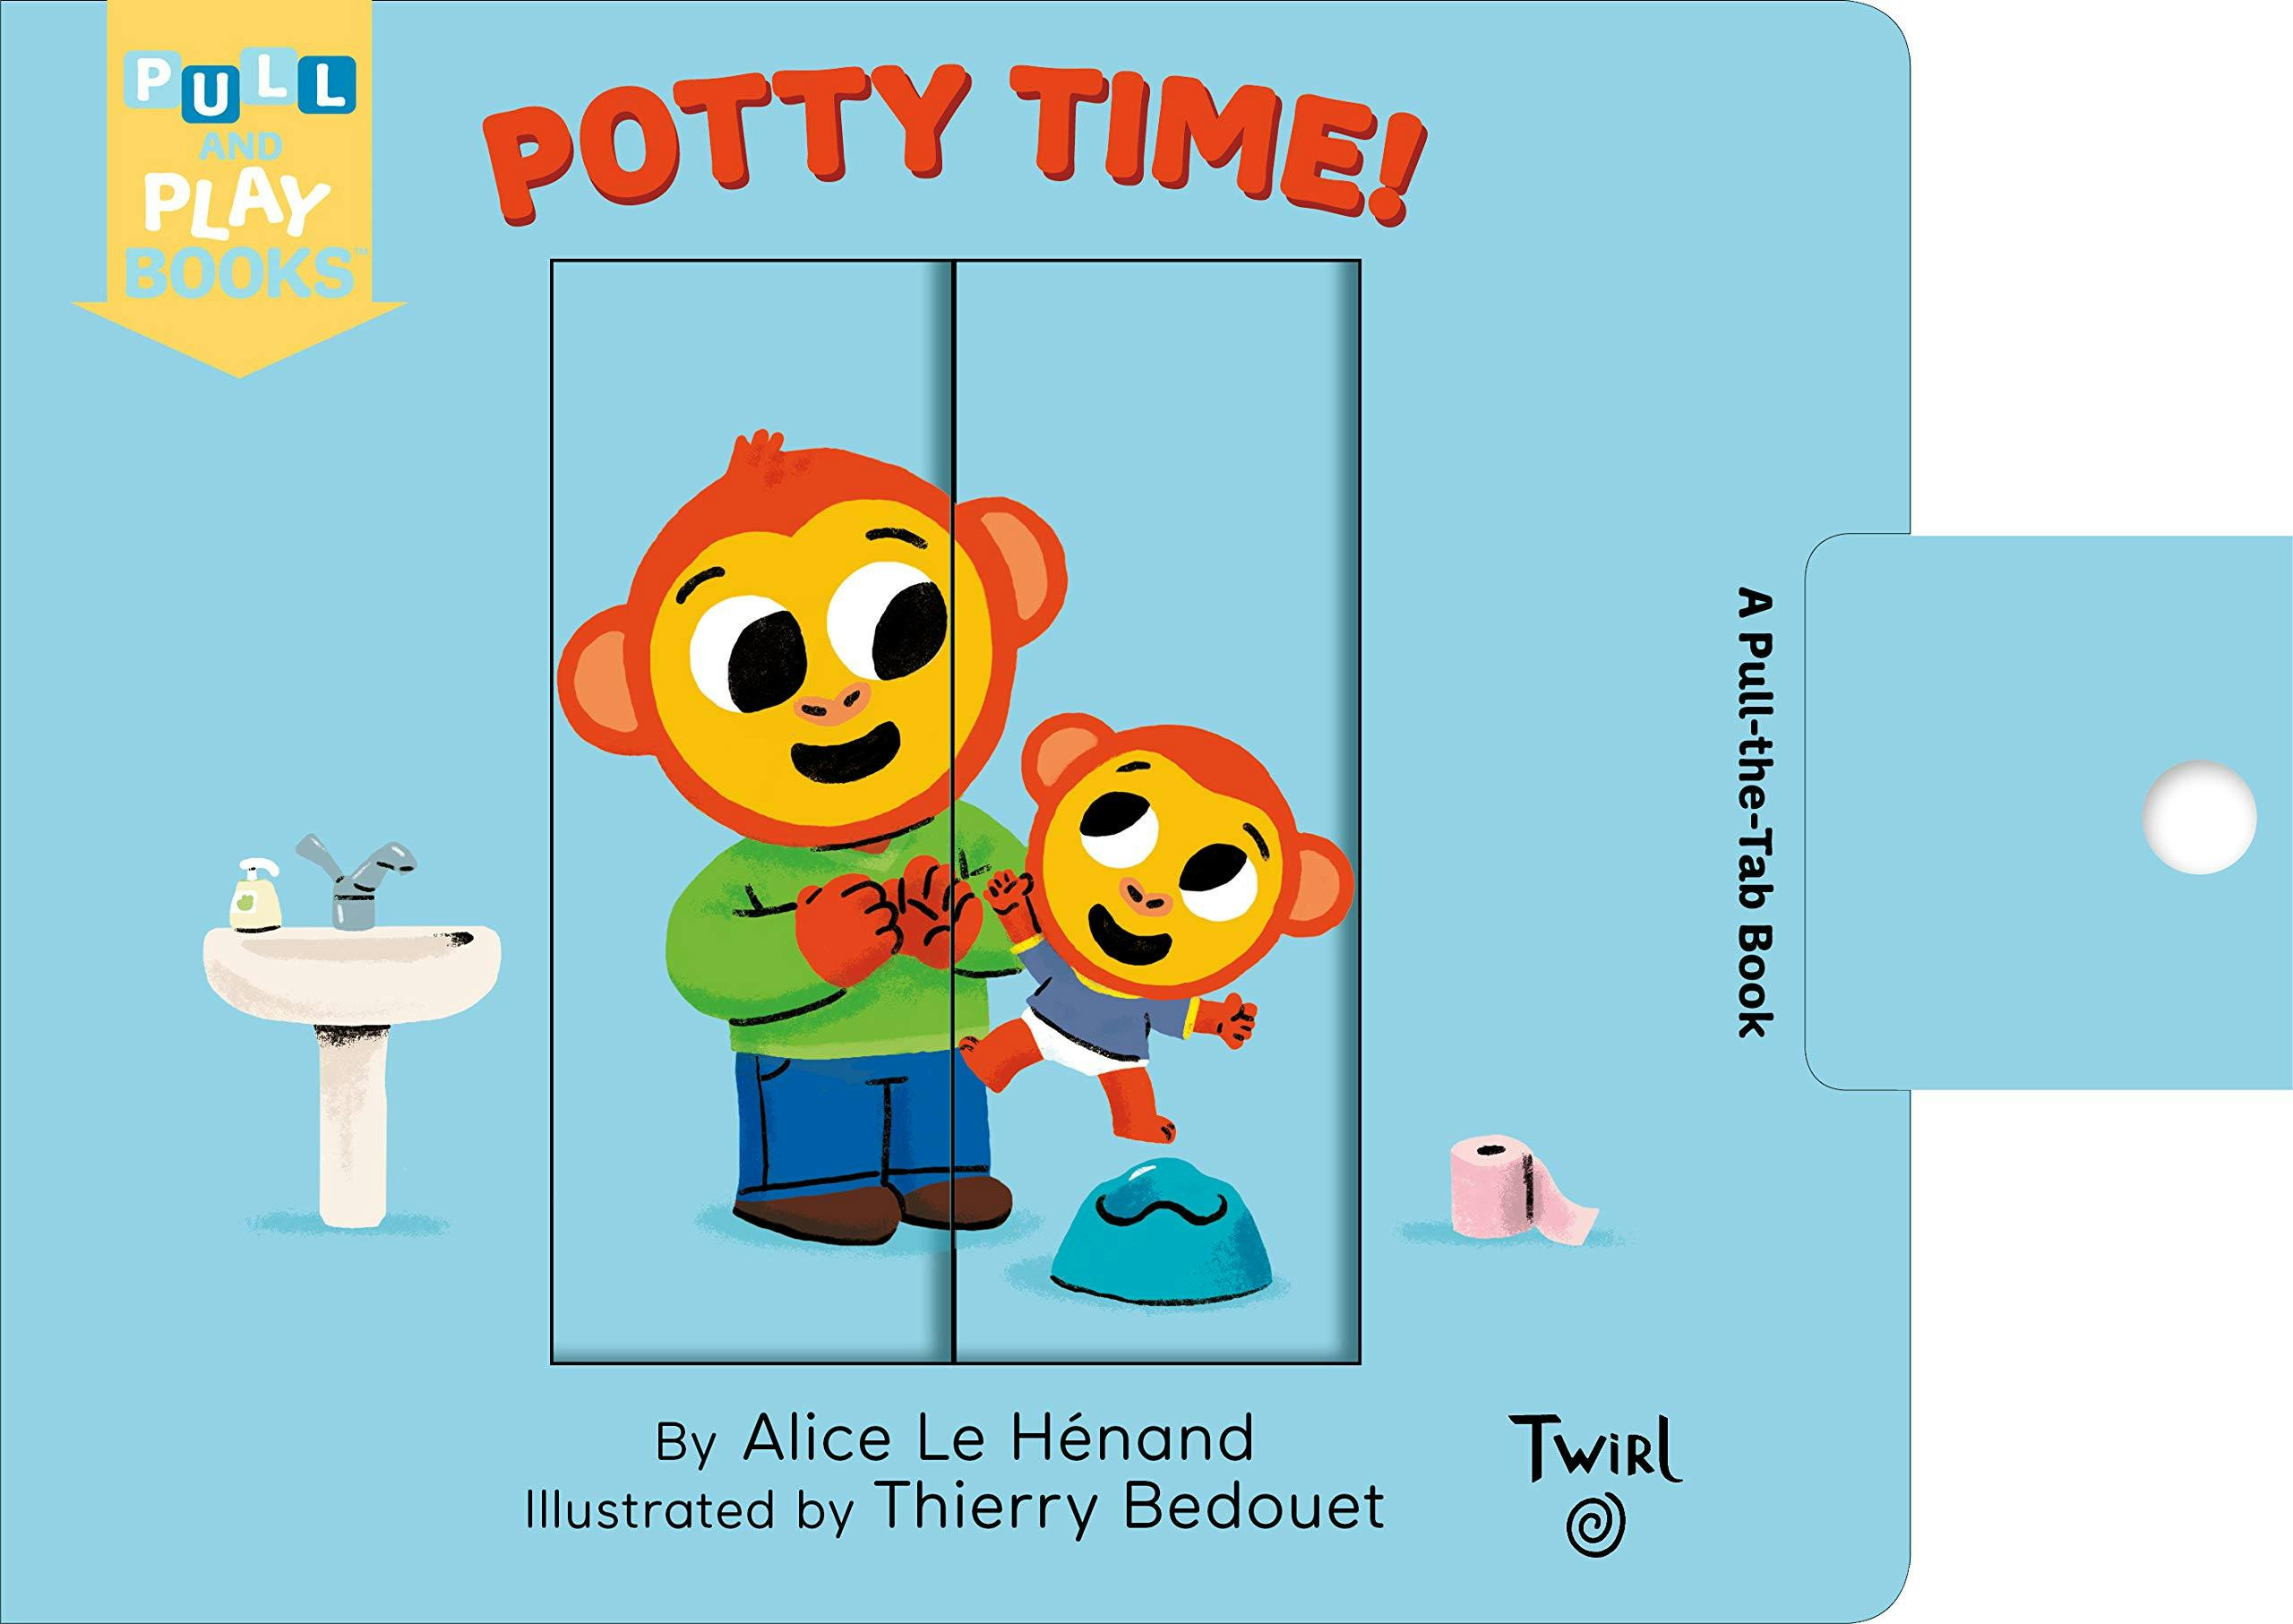 Chronicle Books Potty Time! A Pull-the-Tab Book